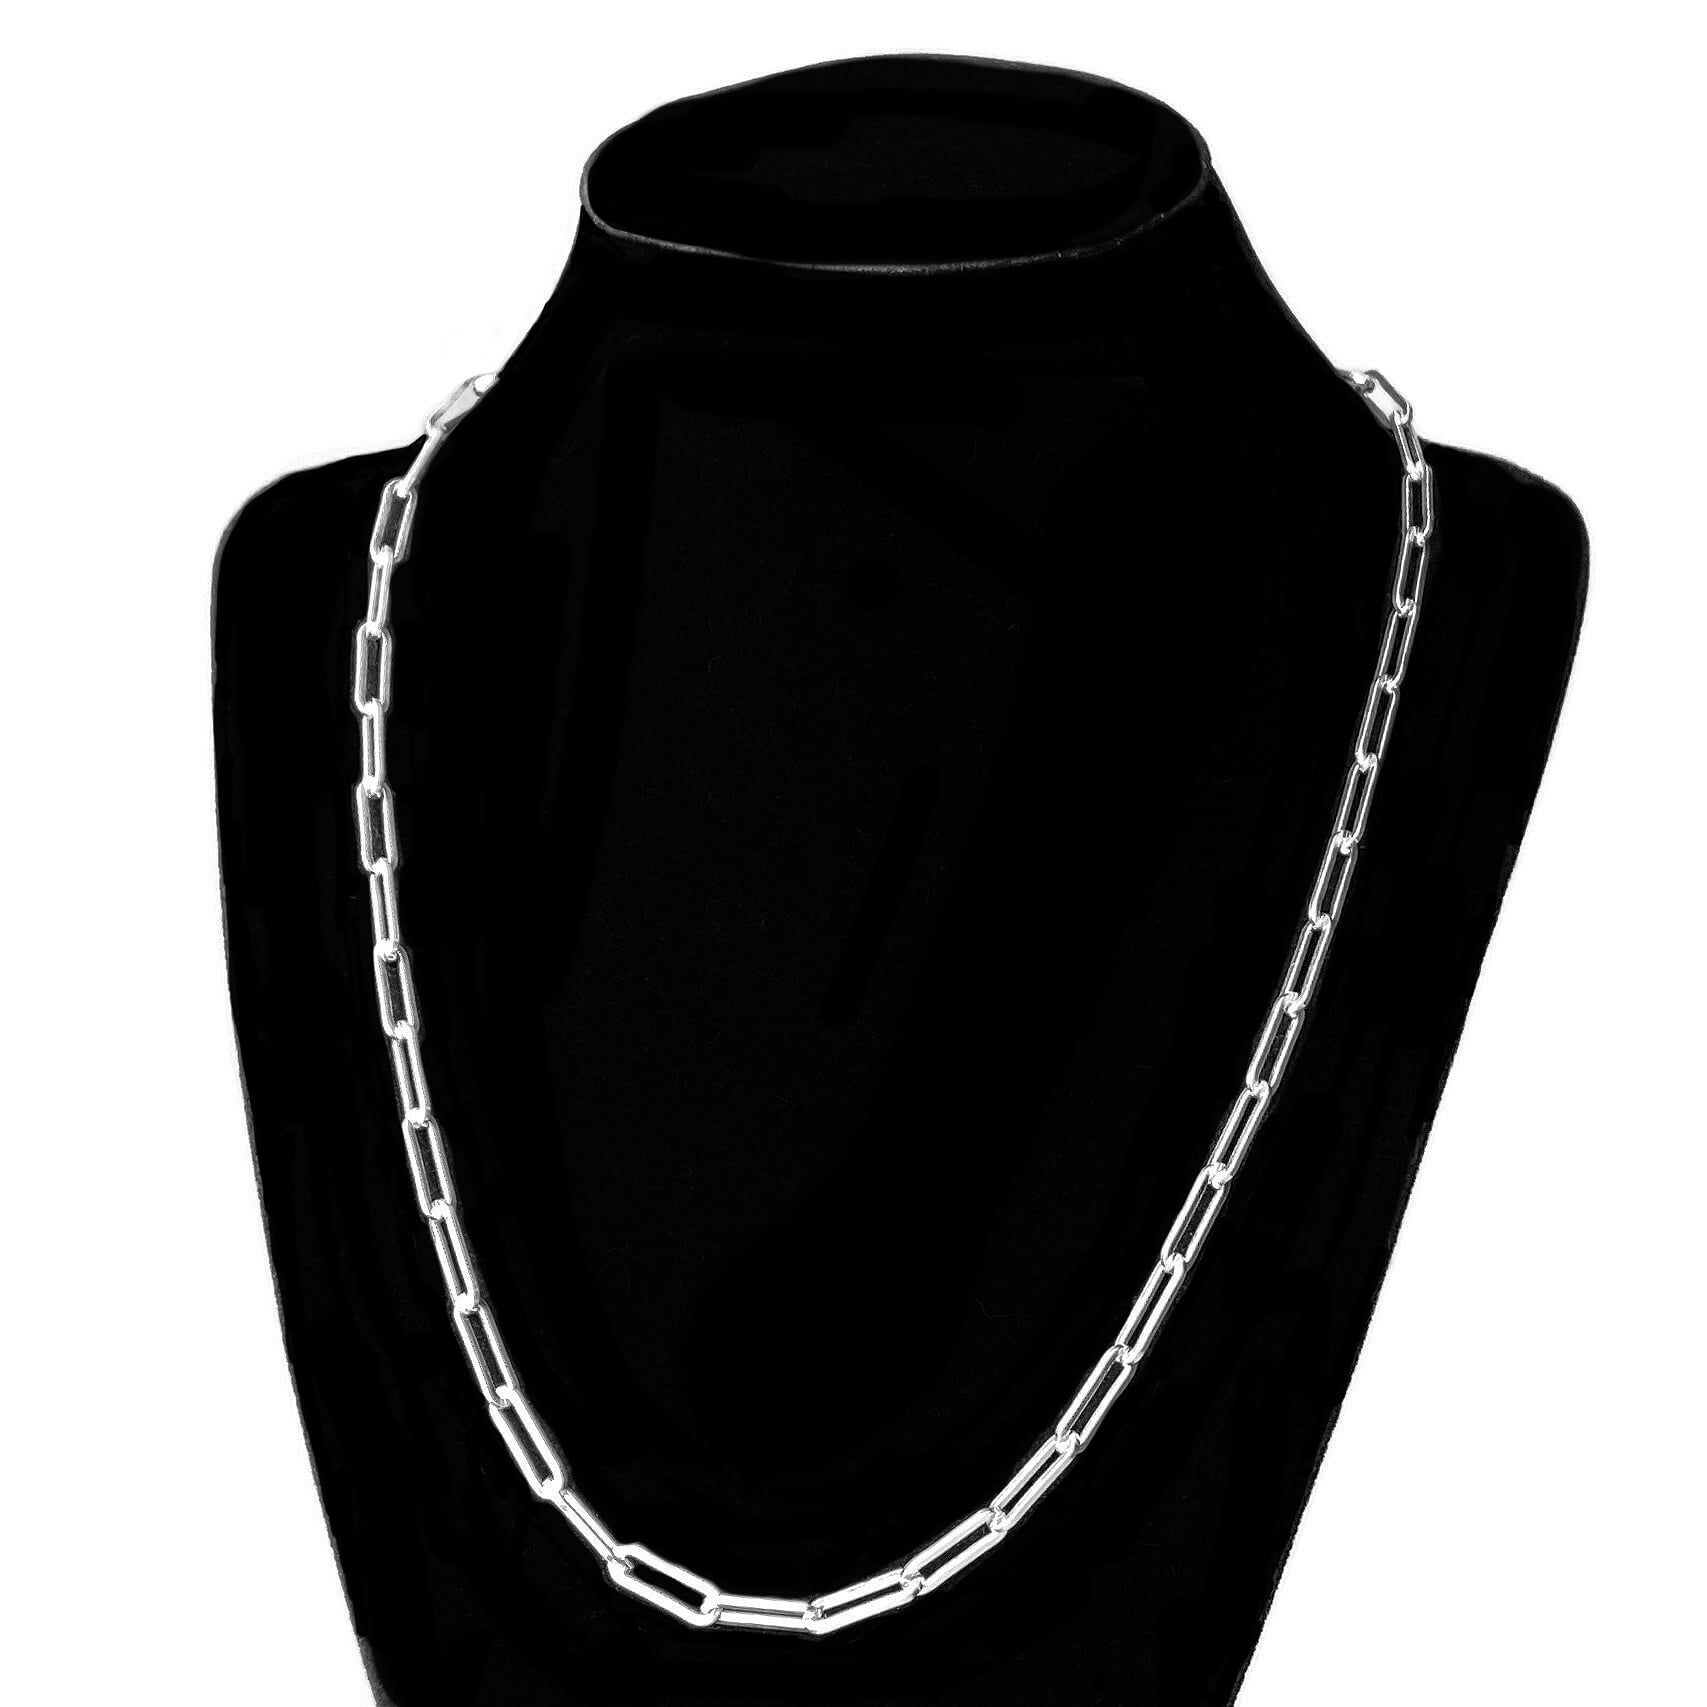 Buy Silver Paperclip Chain Necklace 925 Sterling Silver Smooth 3mm Links  Online in India - Etsy